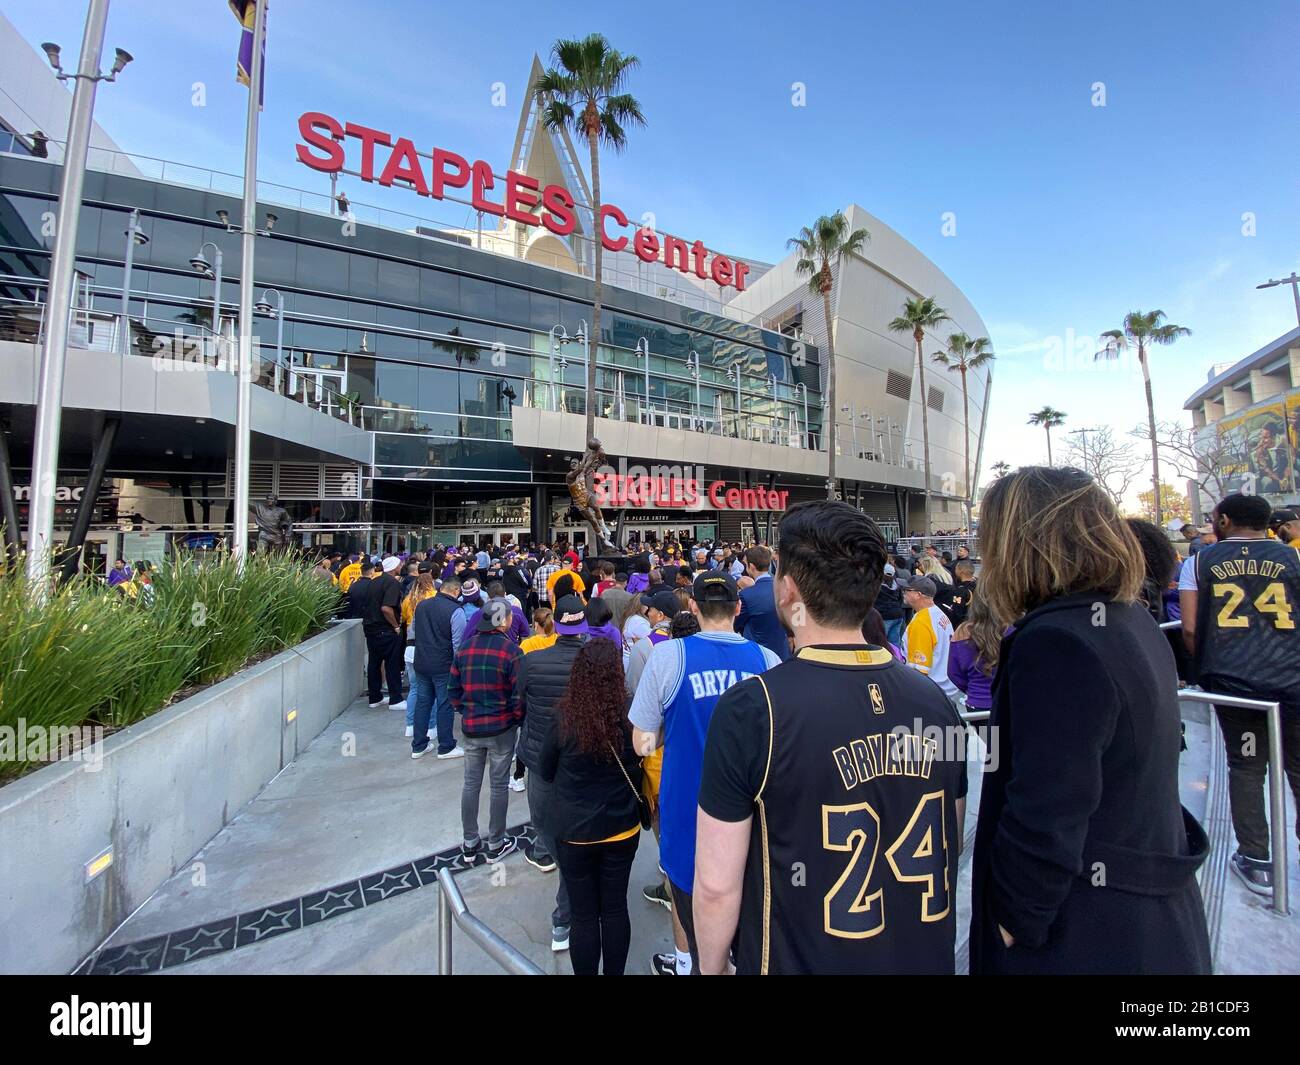 Los Angeles, USA. 24th Feb, 2020. A Celebration of Life Memorial at Staples Center. Twenty thousand people attended the memorial event to honor L.A. Laker Kobe Bryant and 8 others who perished with him in a helicopter crash. 2/24/2020 Los Angeles, CA USA (Photo by Ted Soqui/SIPA USA) Credit: Sipa USA/Alamy Live News Stock Photo